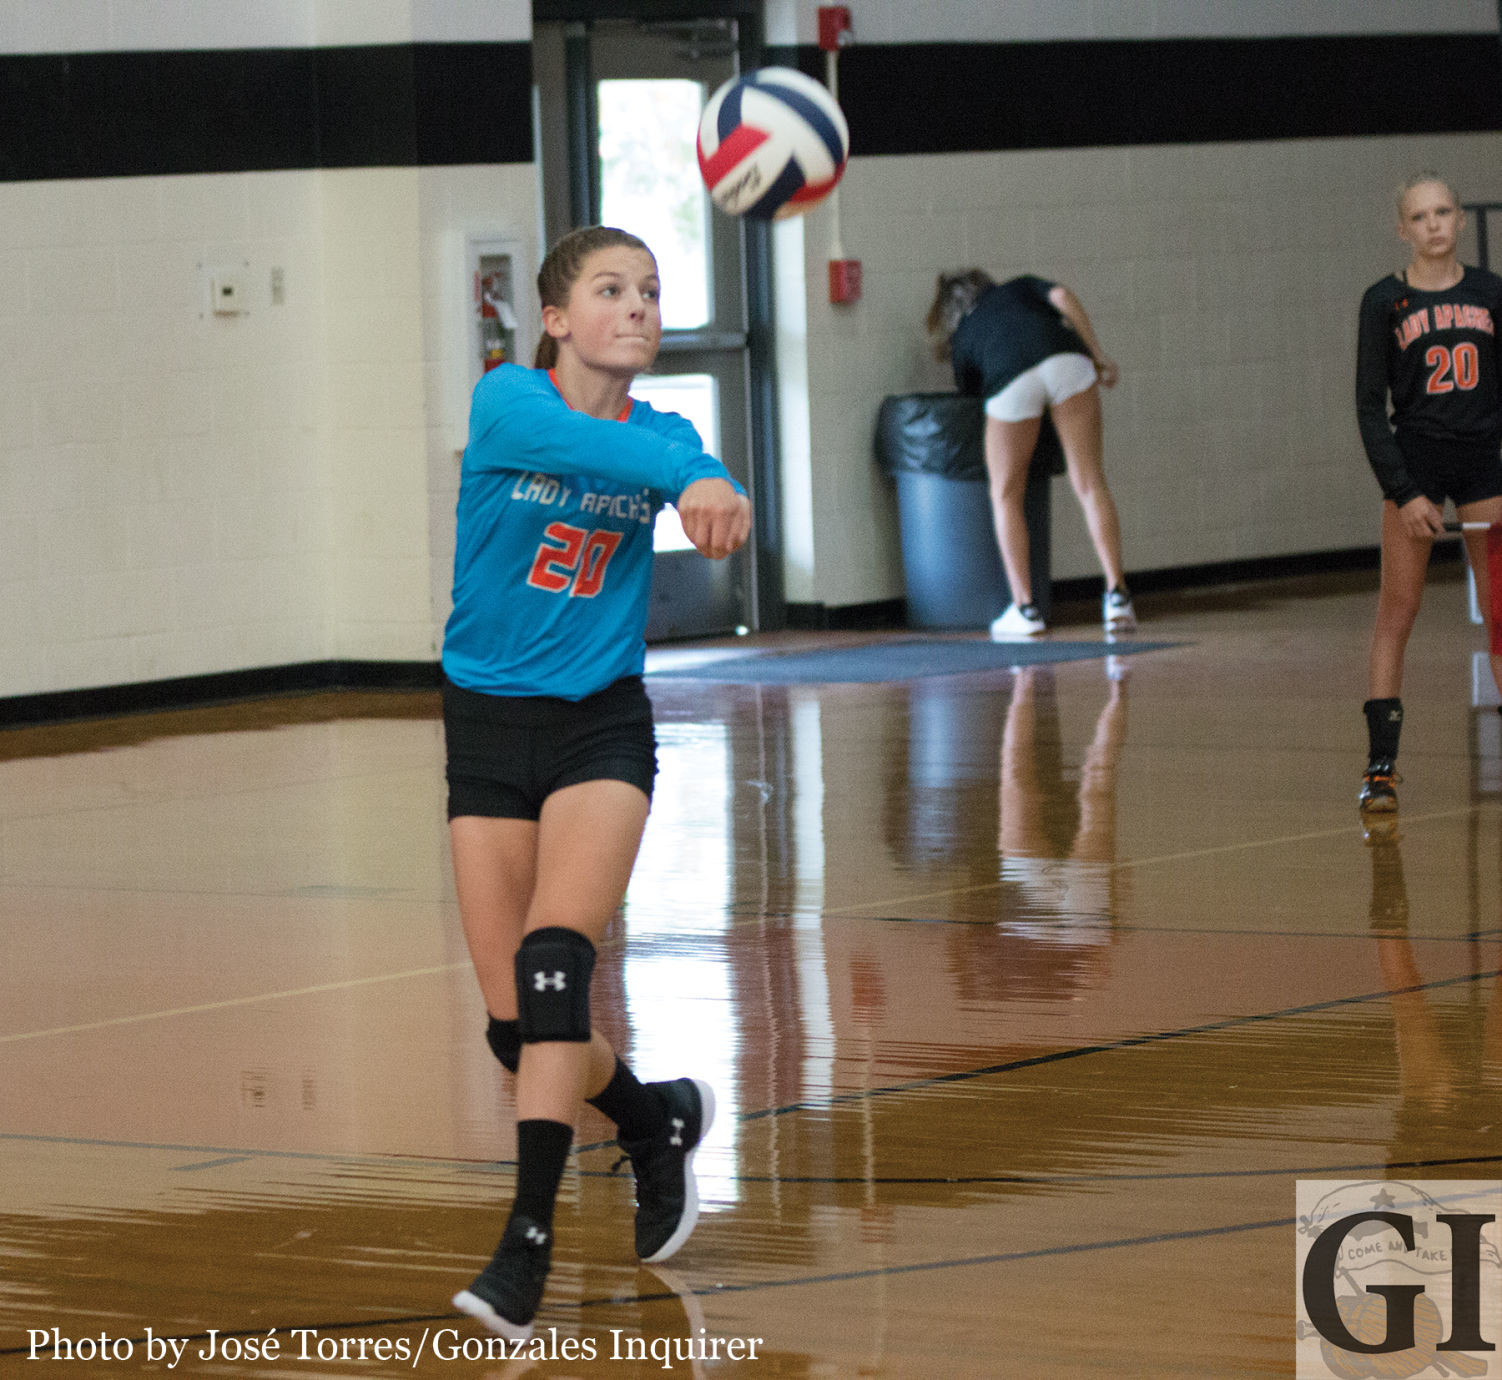 Sam Barnick (20) played libero for the Lady Apaches as she passes it to a setter in their four-set loss to UC Randolph.